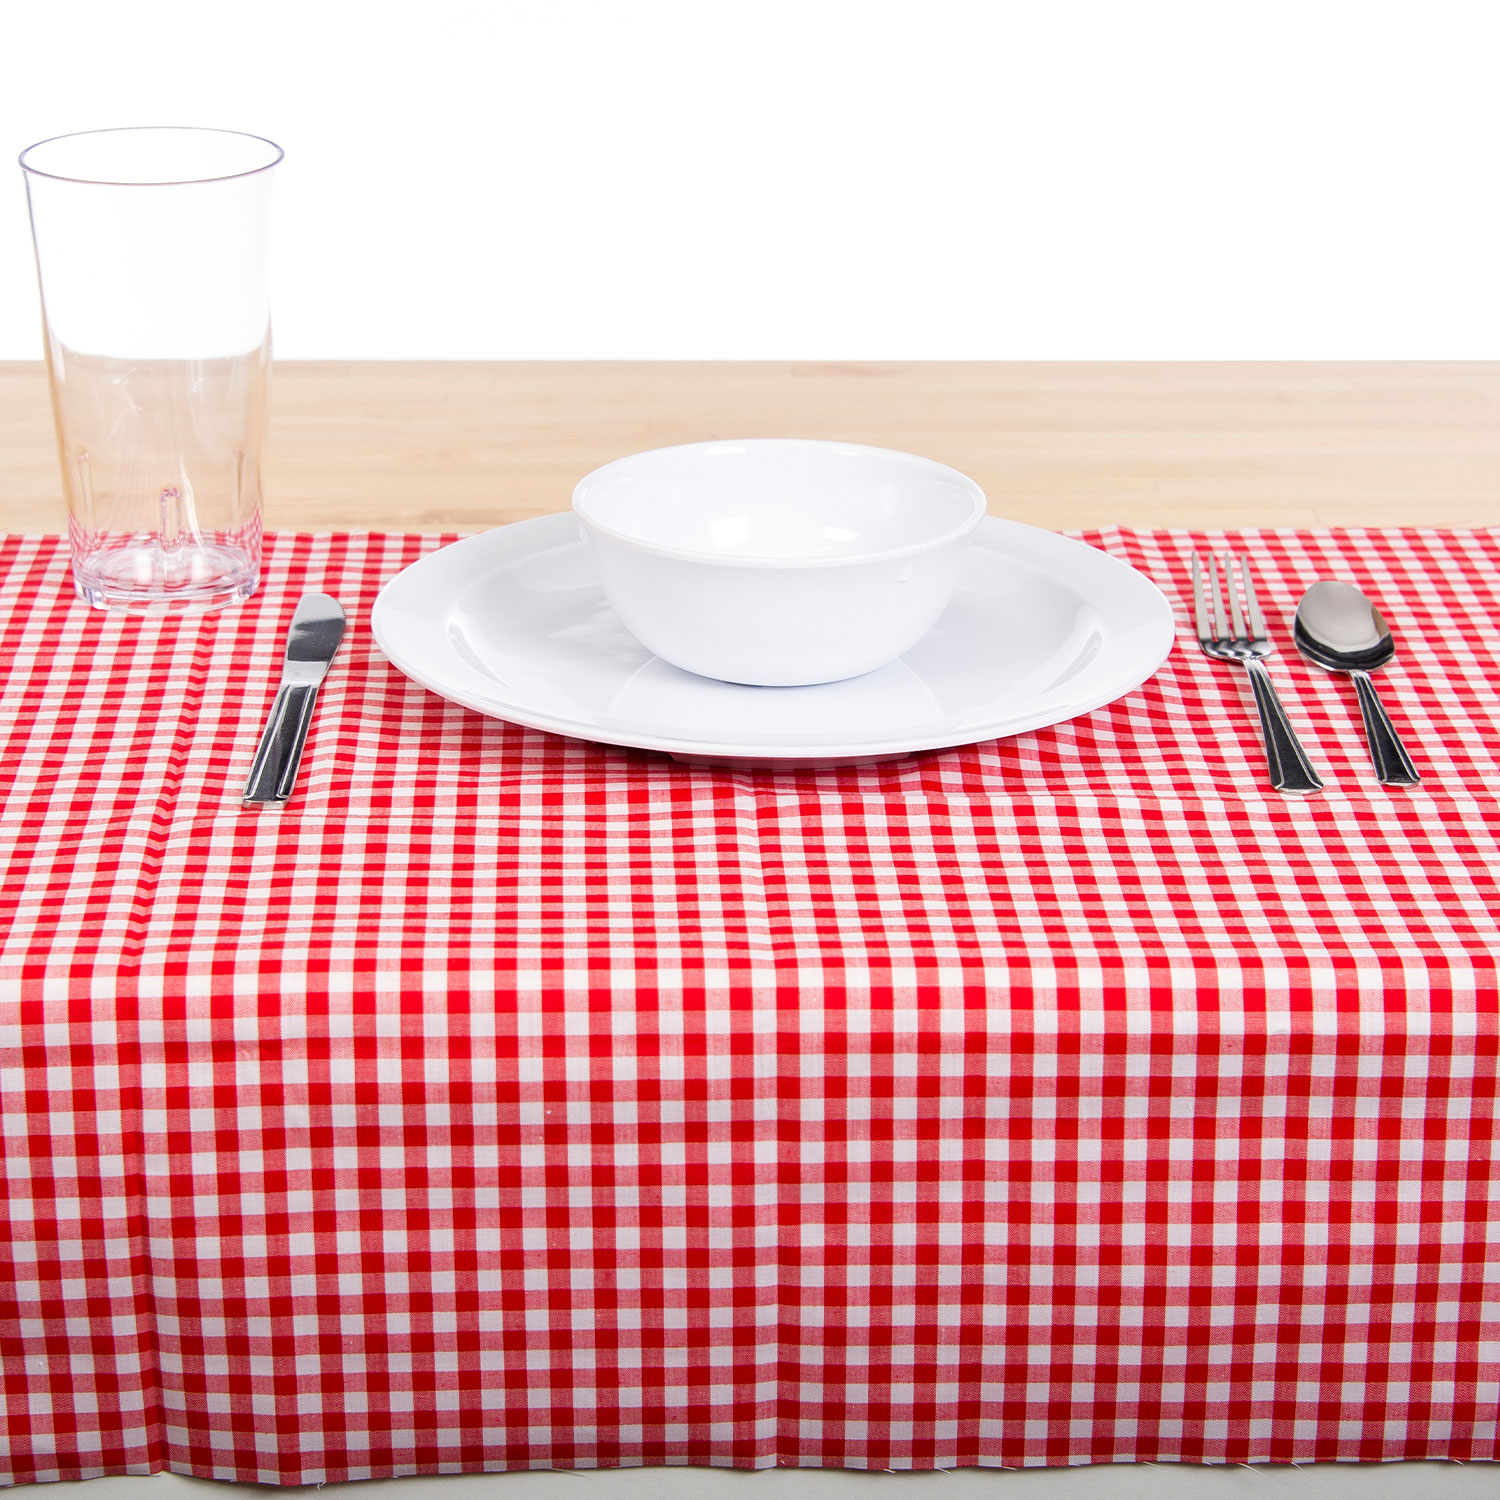 At Home Science - Tablecloth Trick